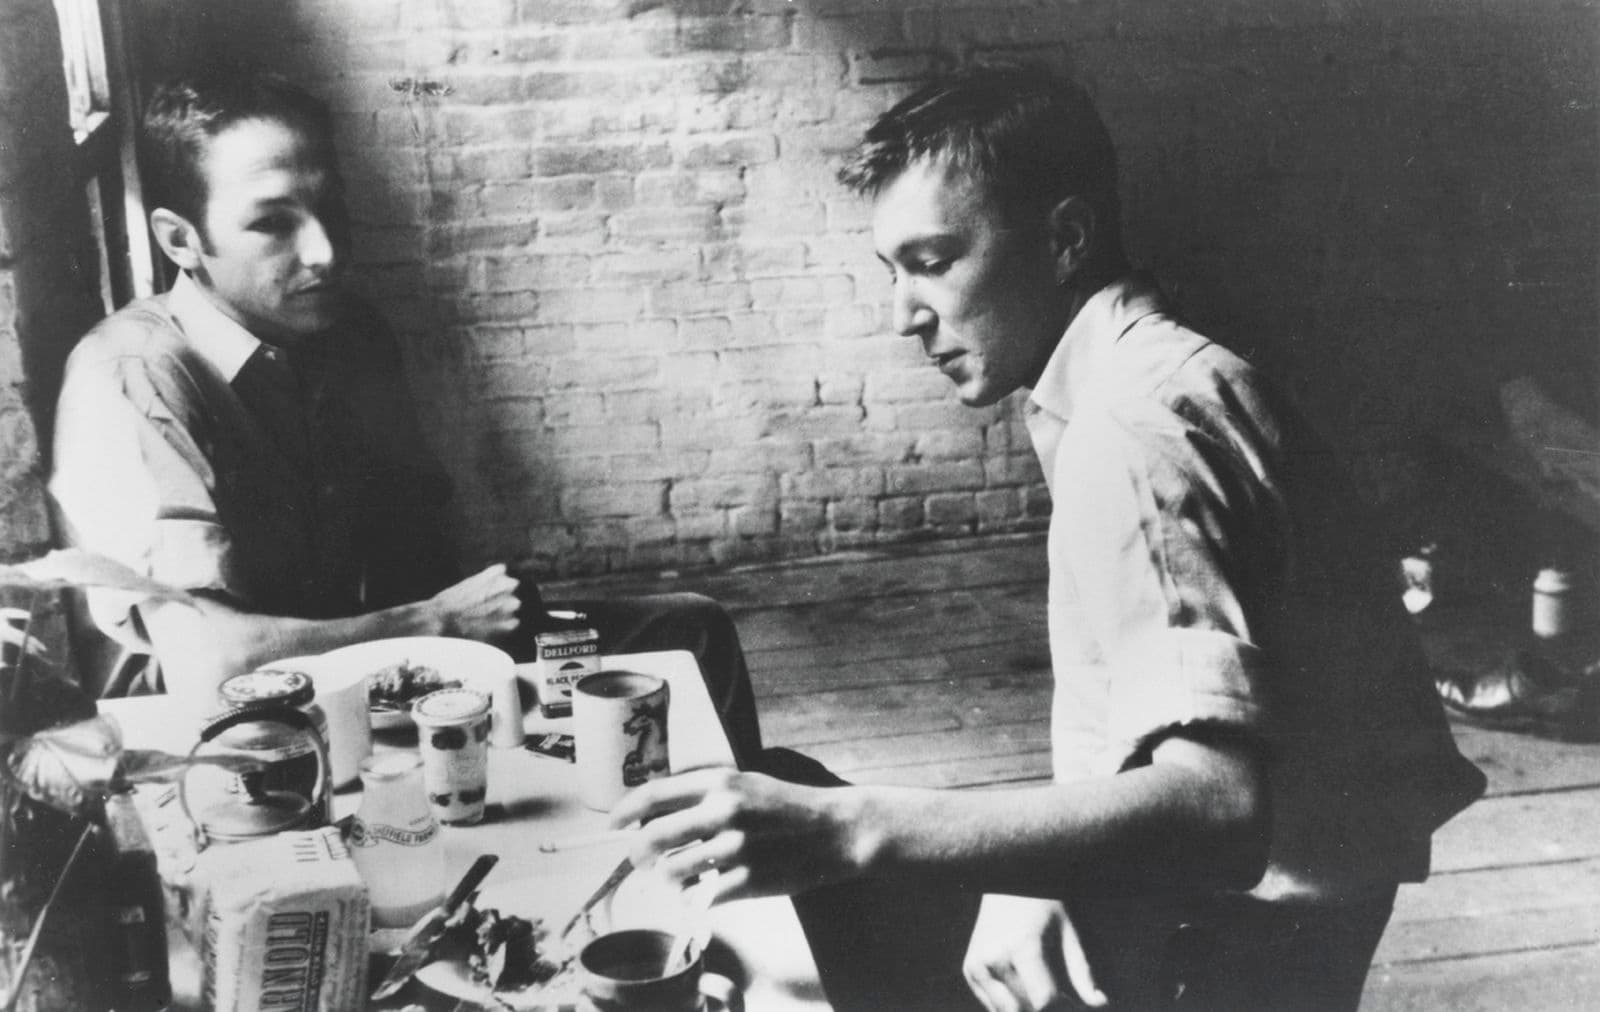 A black and white image of two men sitting around a rectangular table with crockery and food, and a brick wall behind them